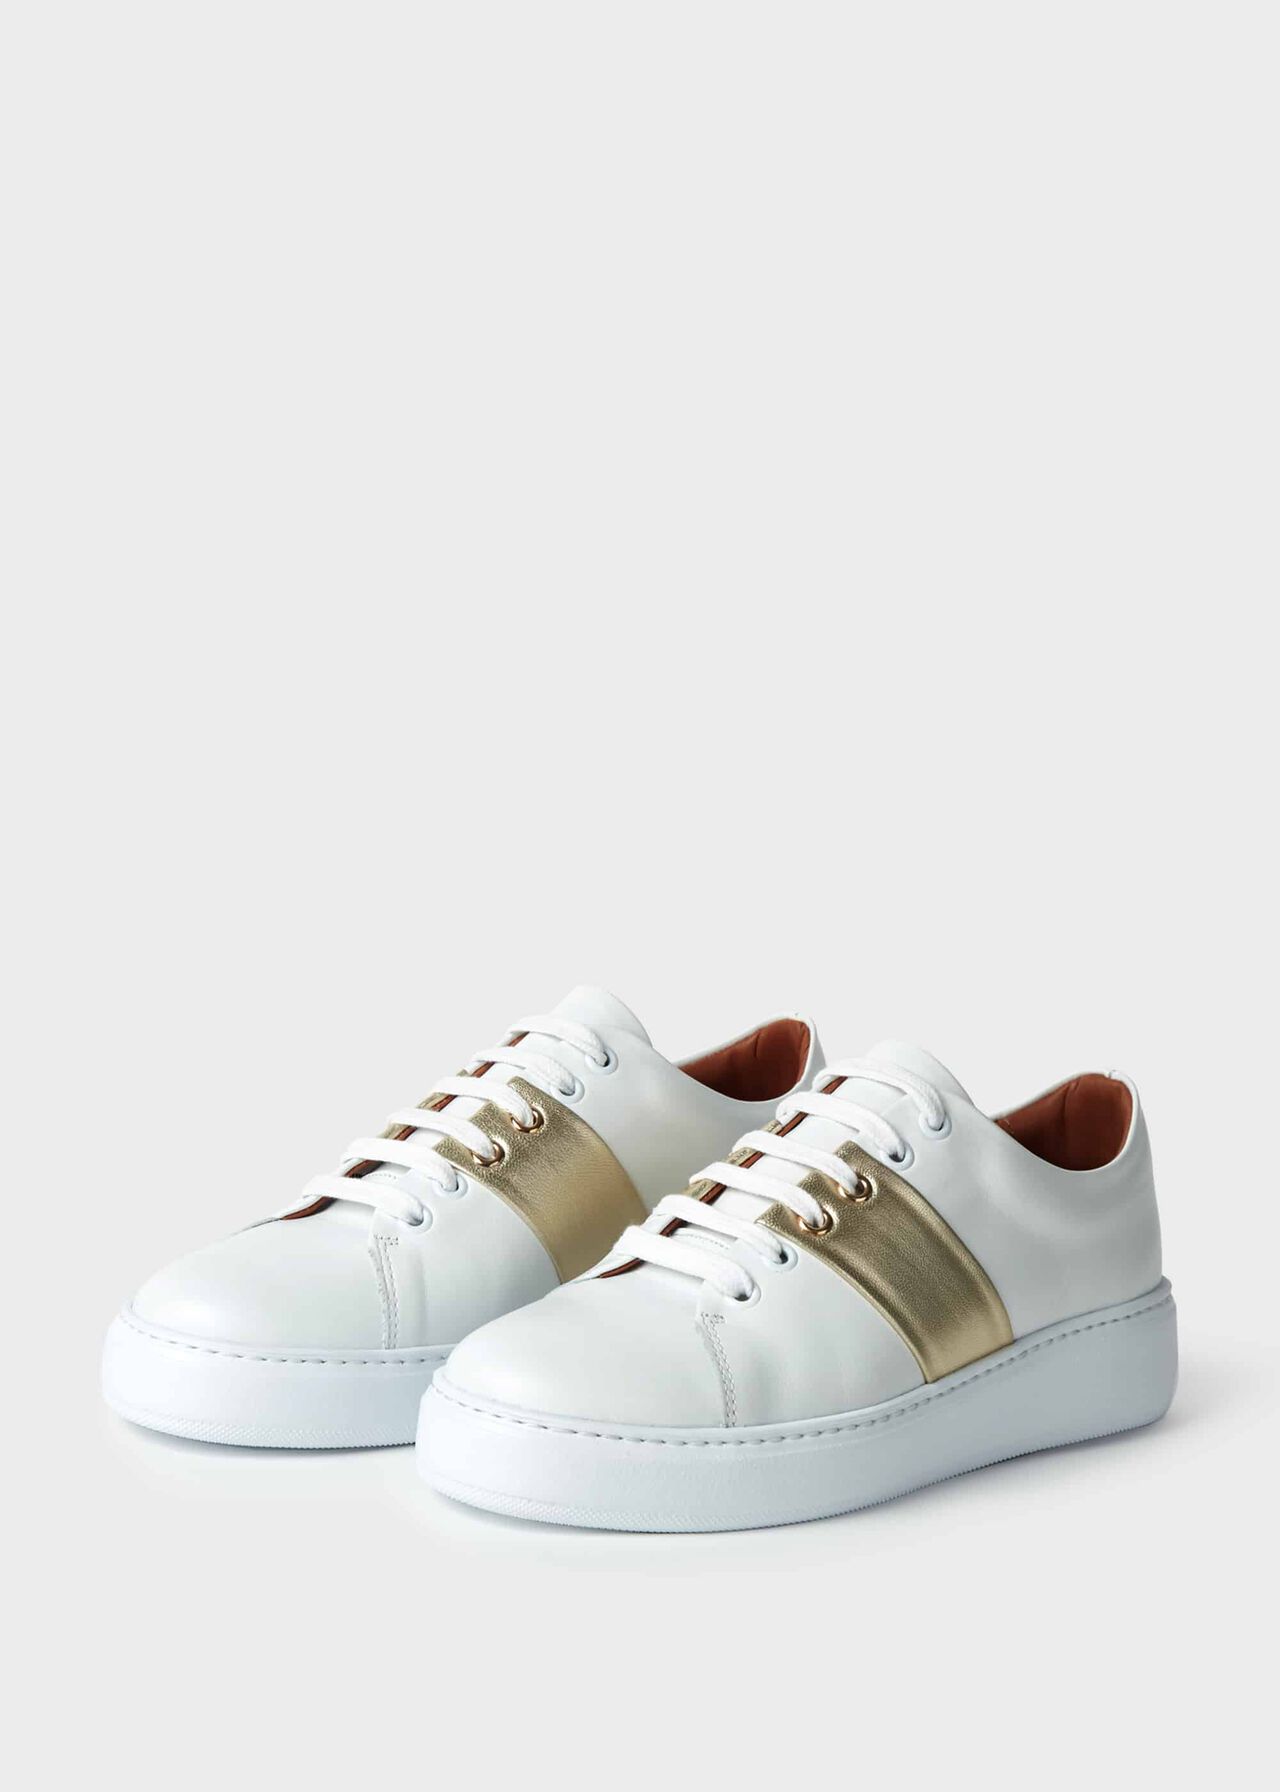 Cleo Sneakers, White Gold, hi-res